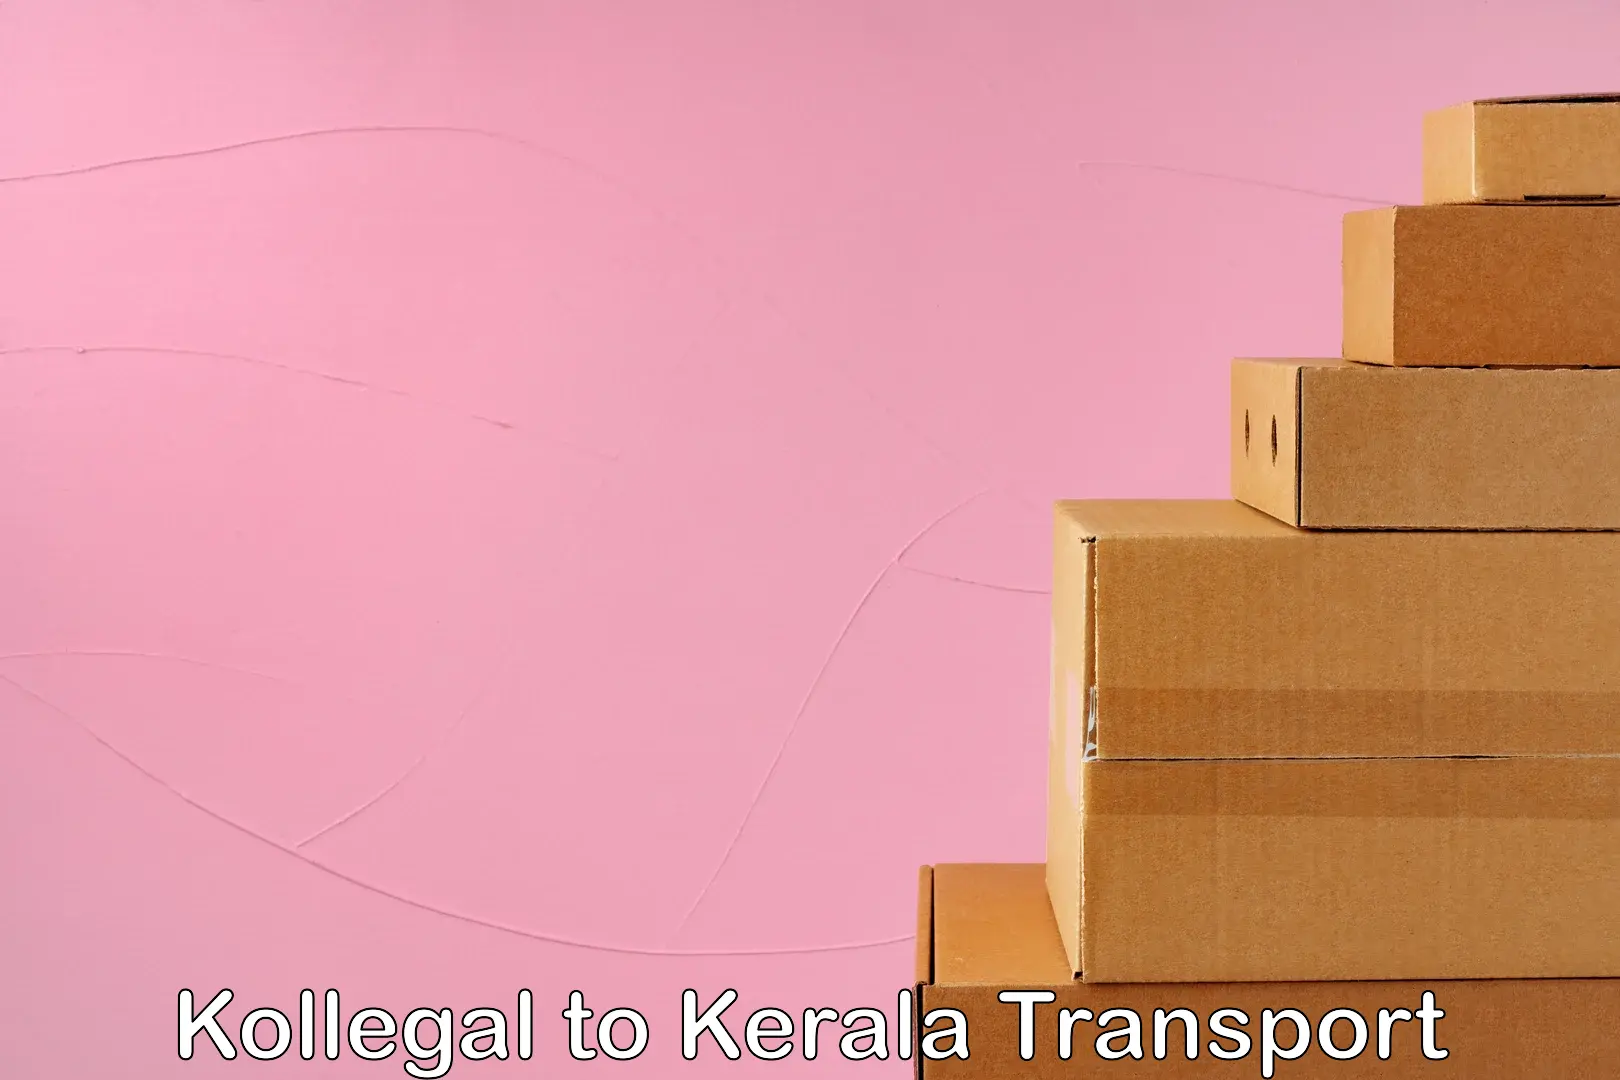 Express transport services Kollegal to Changanacherry